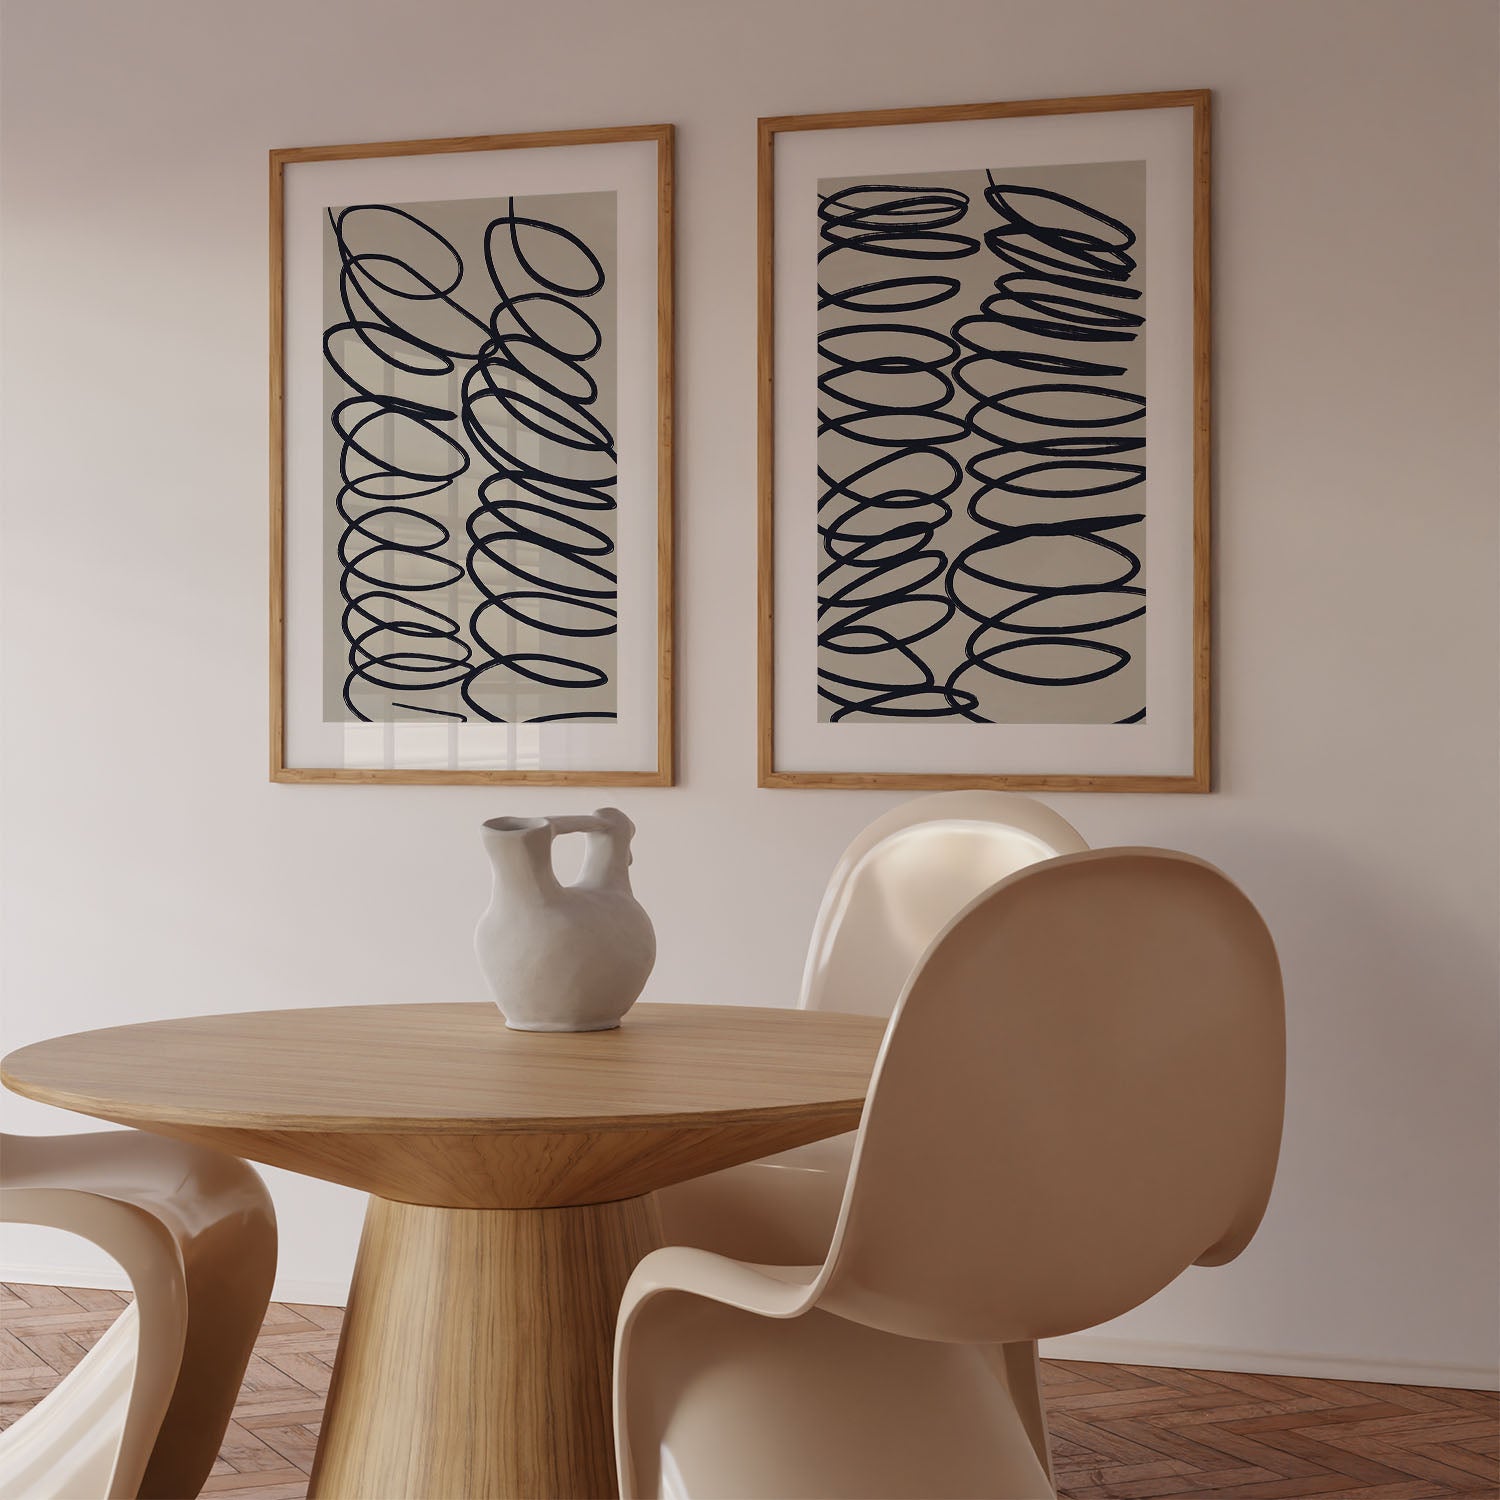 Curved Lines - Framed Print Set Of 2-framed-Wall Art Print Set Of 2-Abstract House